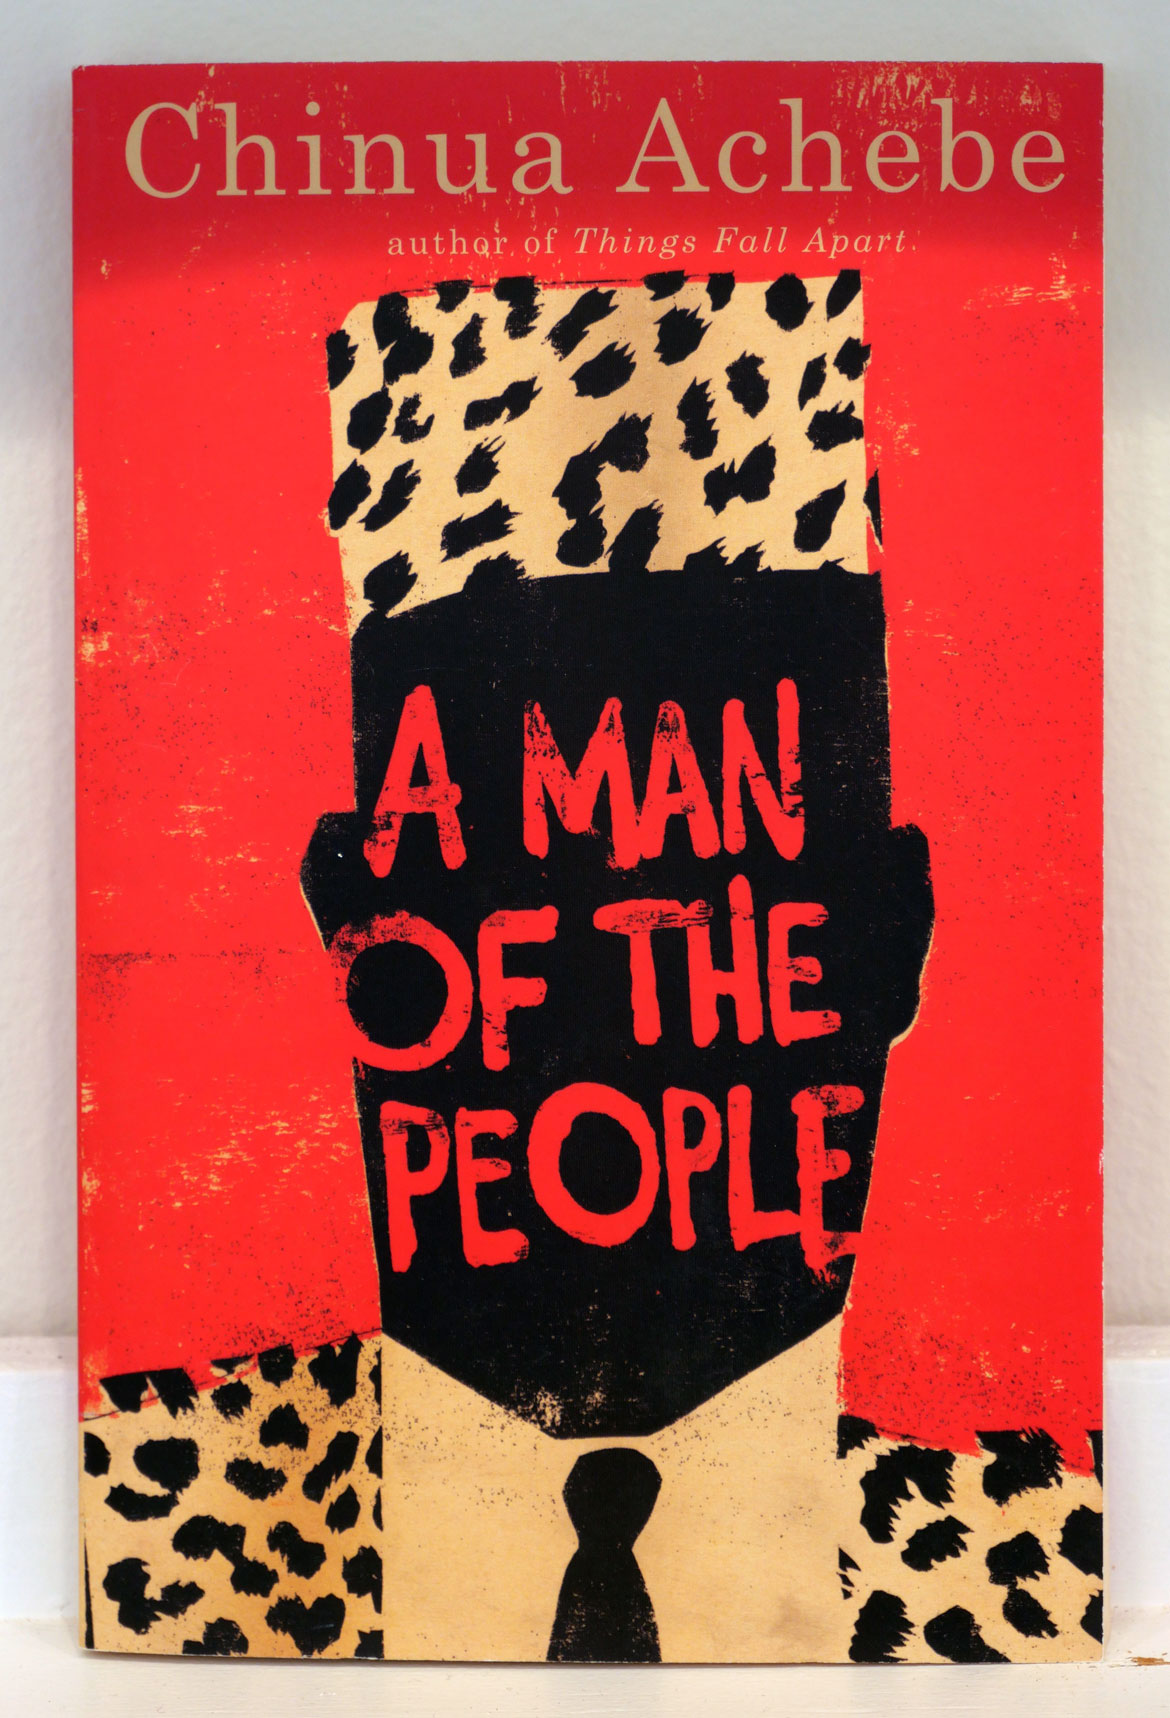 Edel Rodriguez's cover illustration for Chinua Achebe's book "A Man of the People."